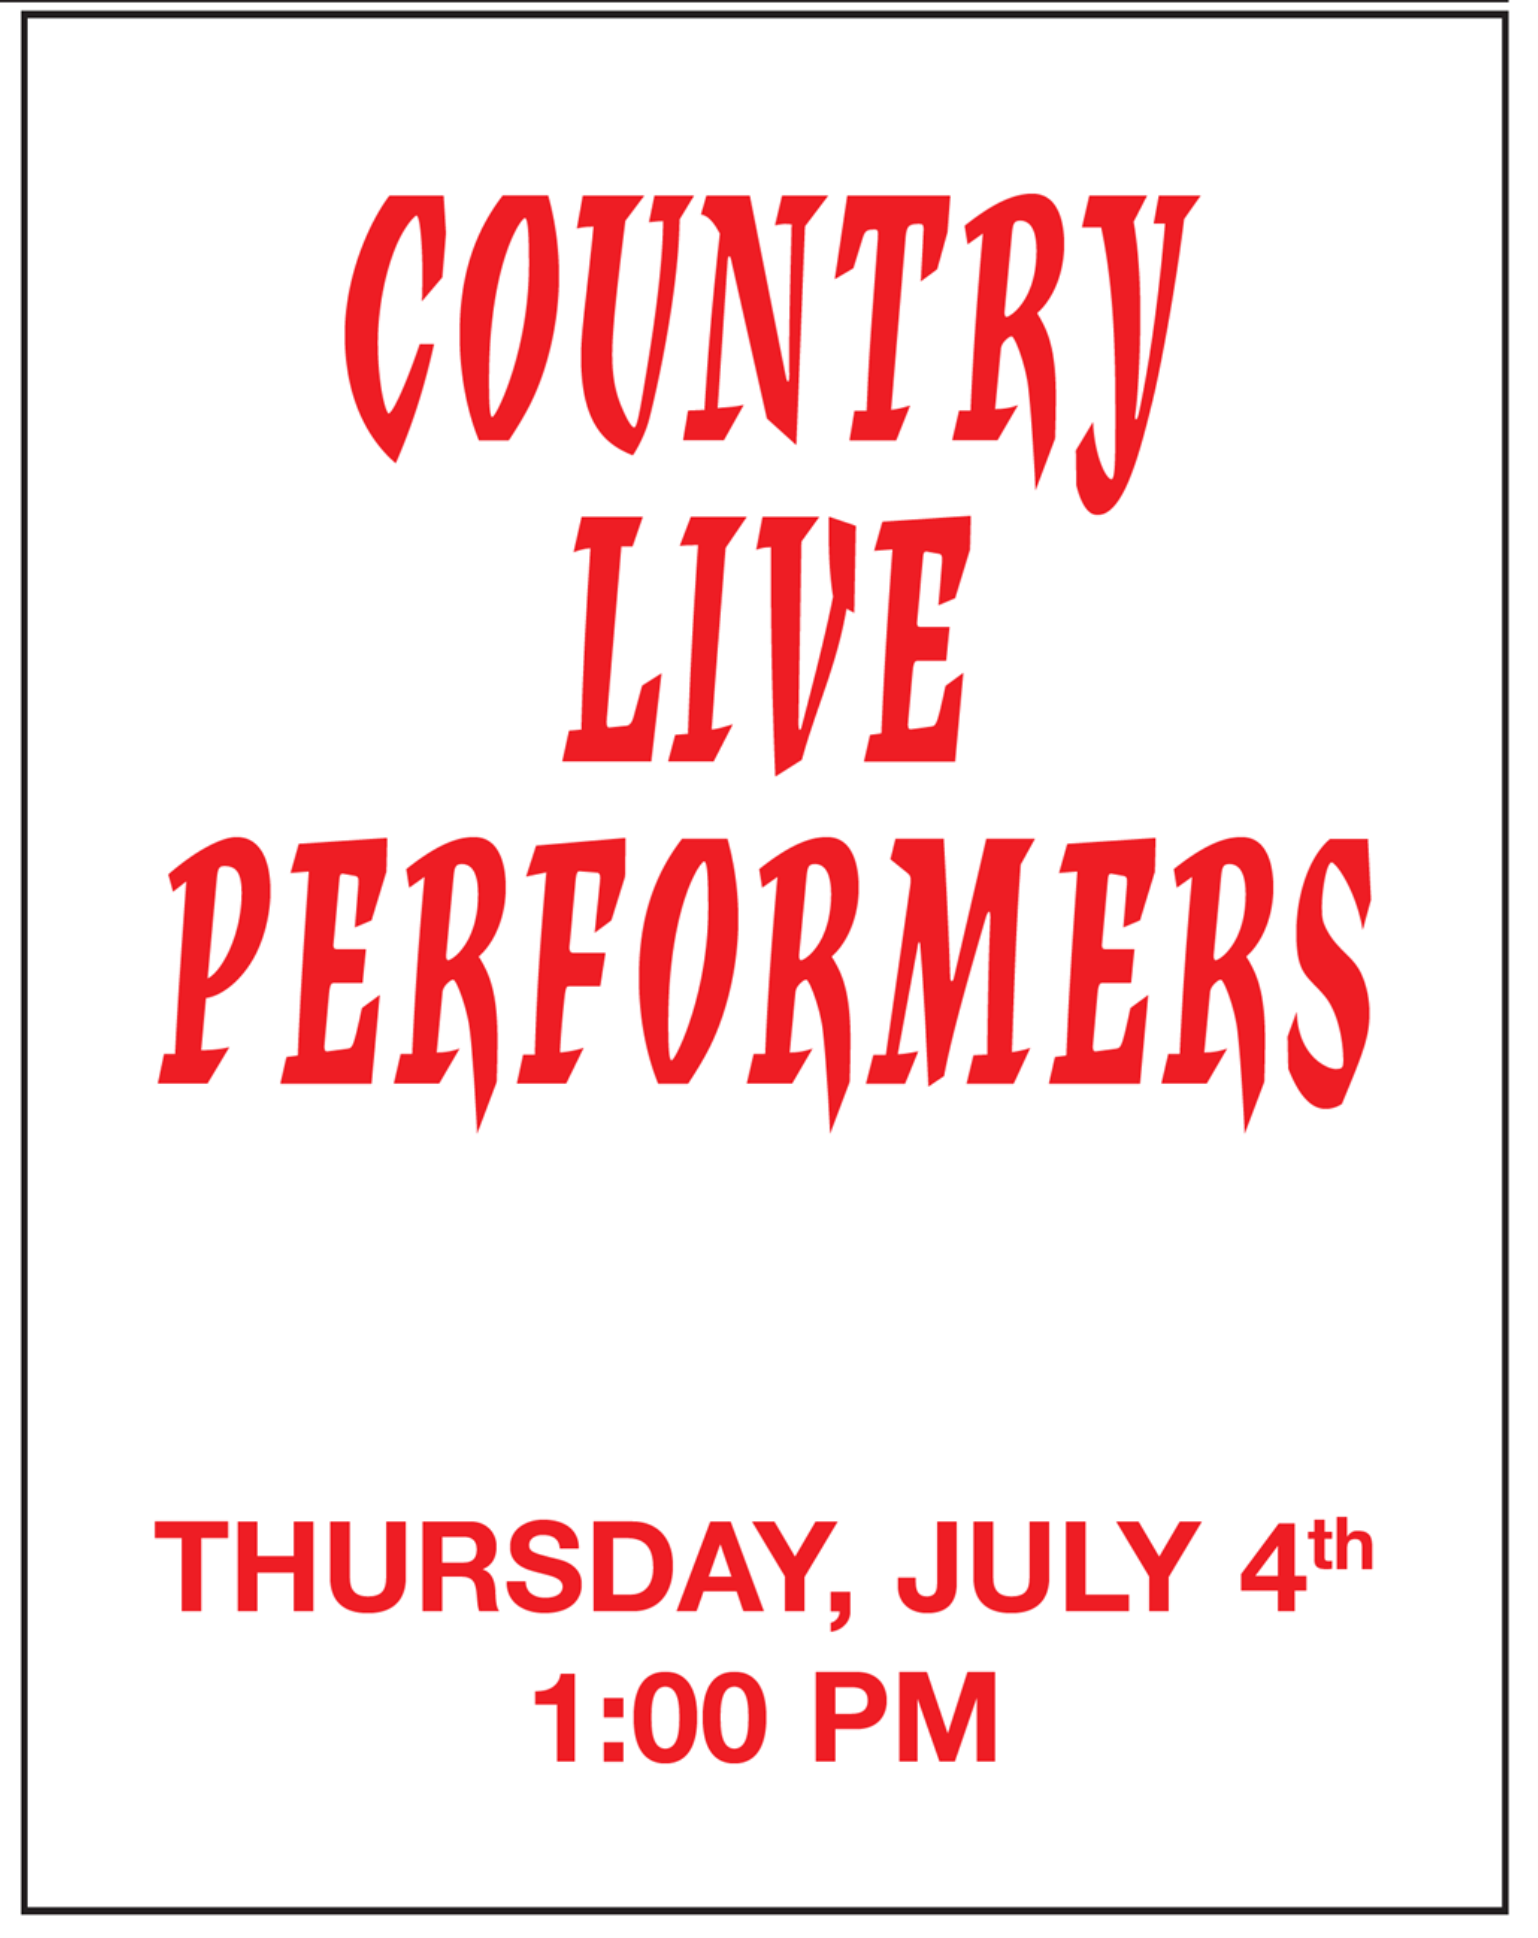 2013 county live performers july 4